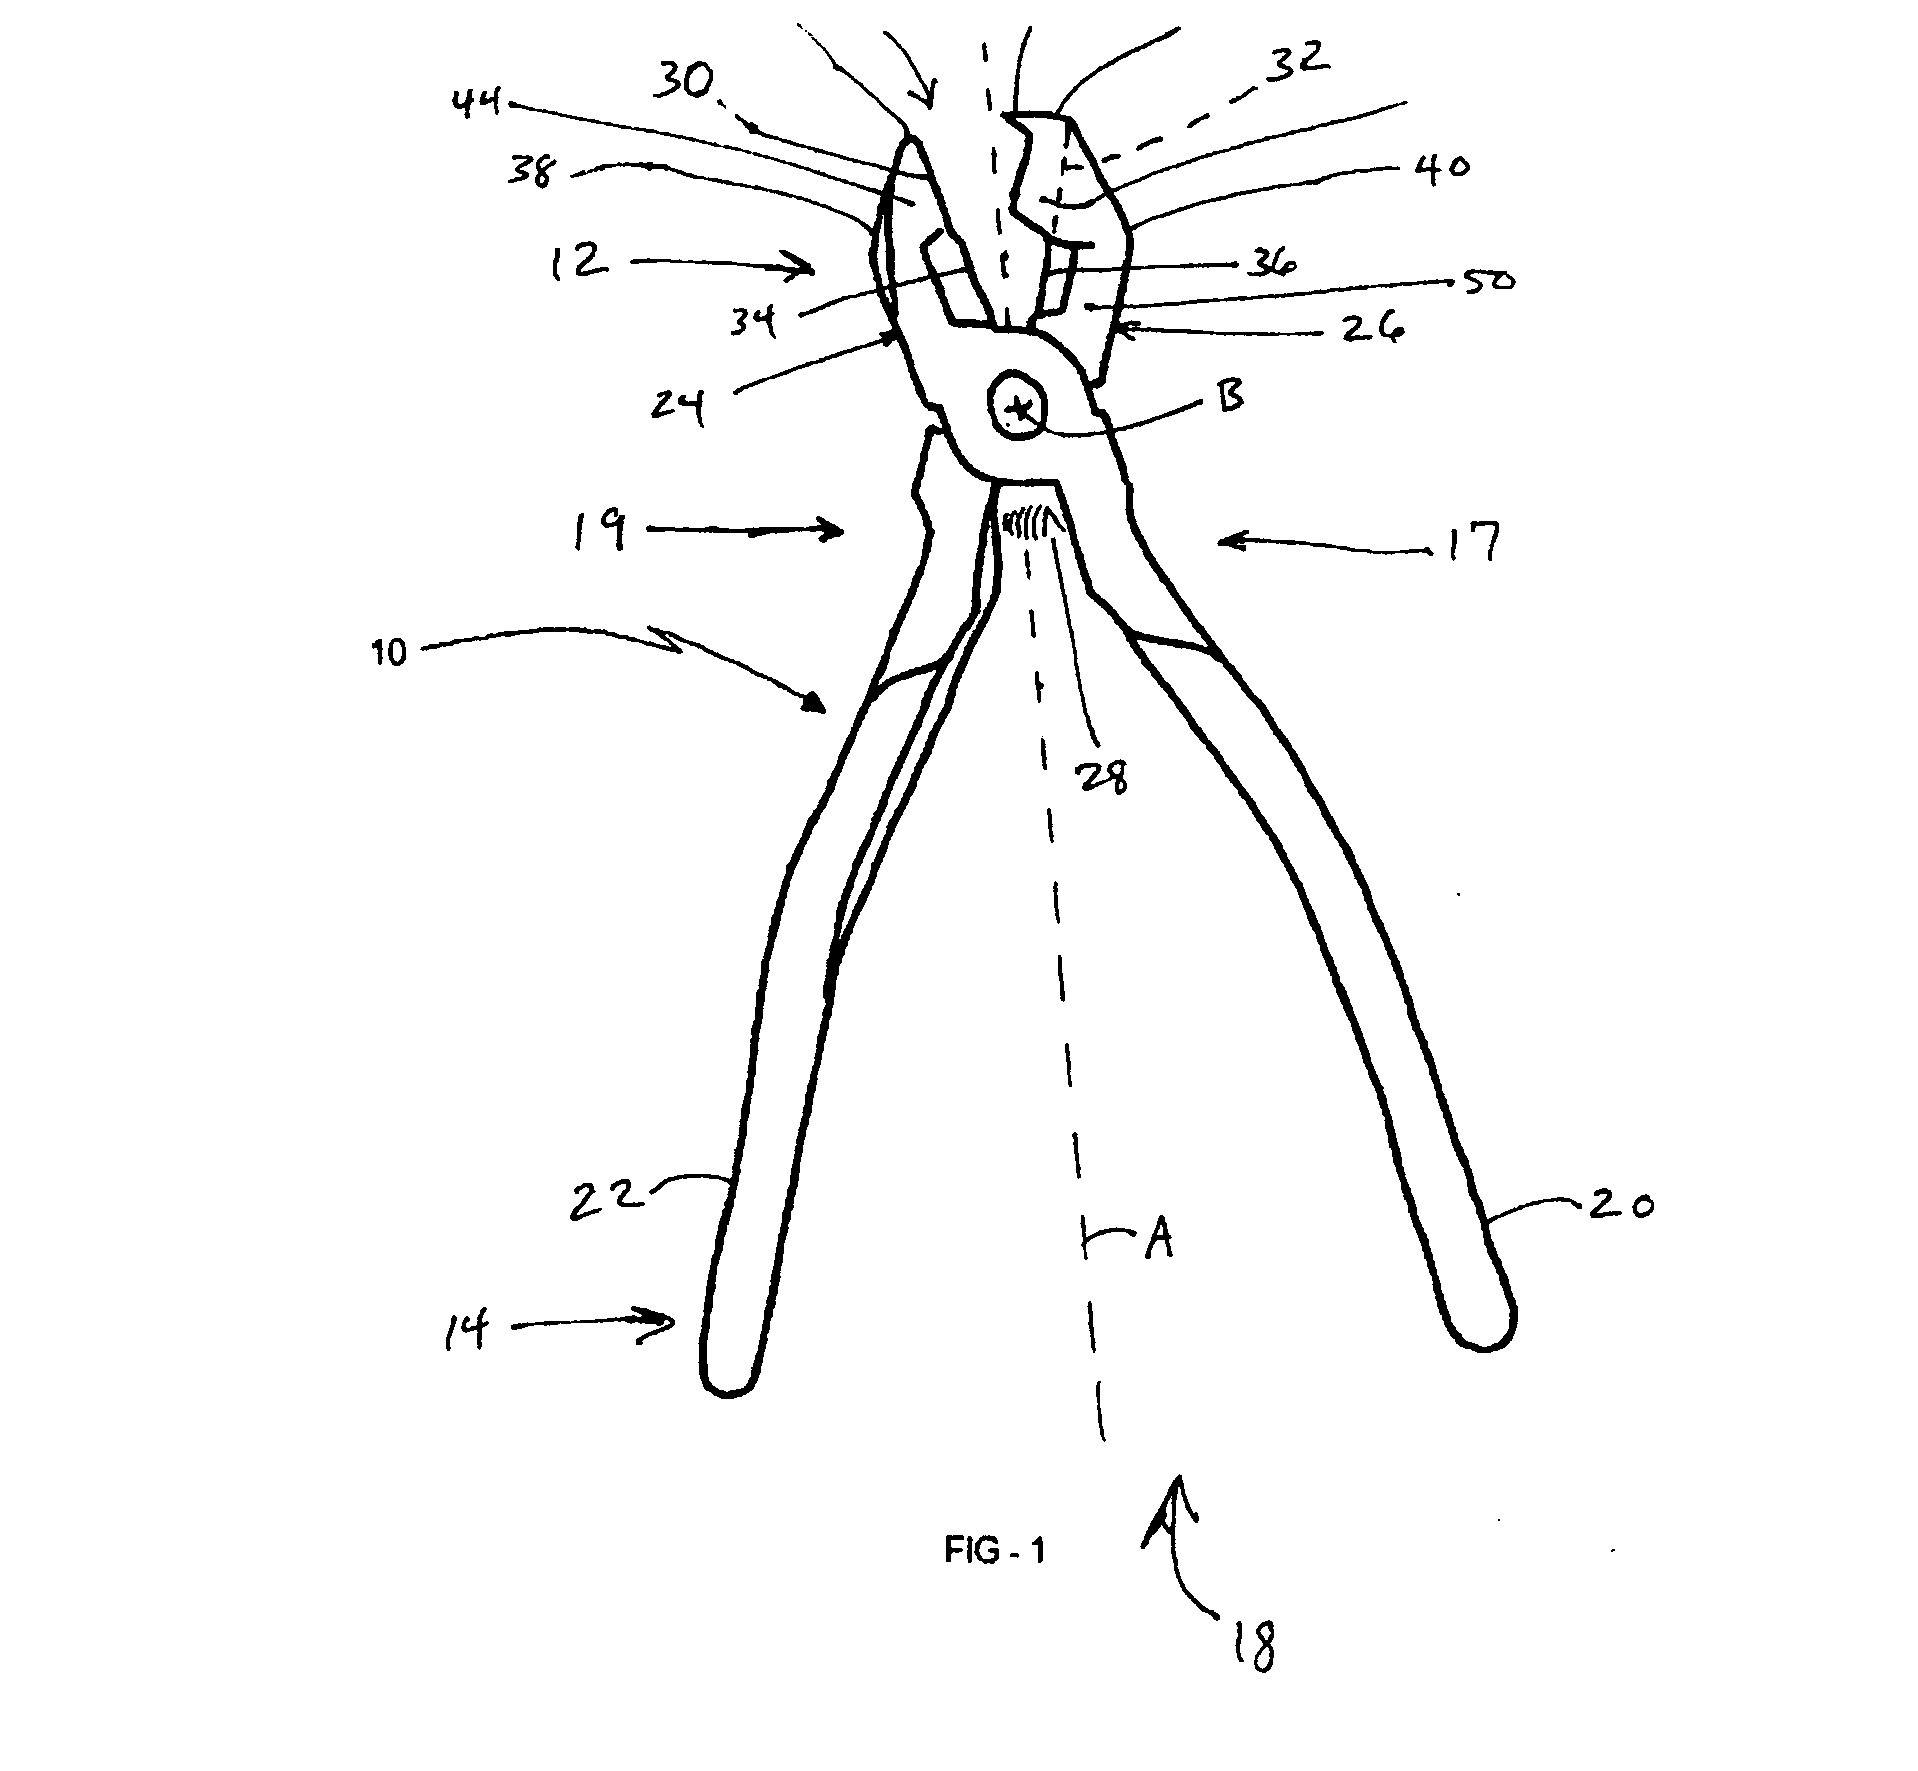 Pliers for cutting and holding straps and the like